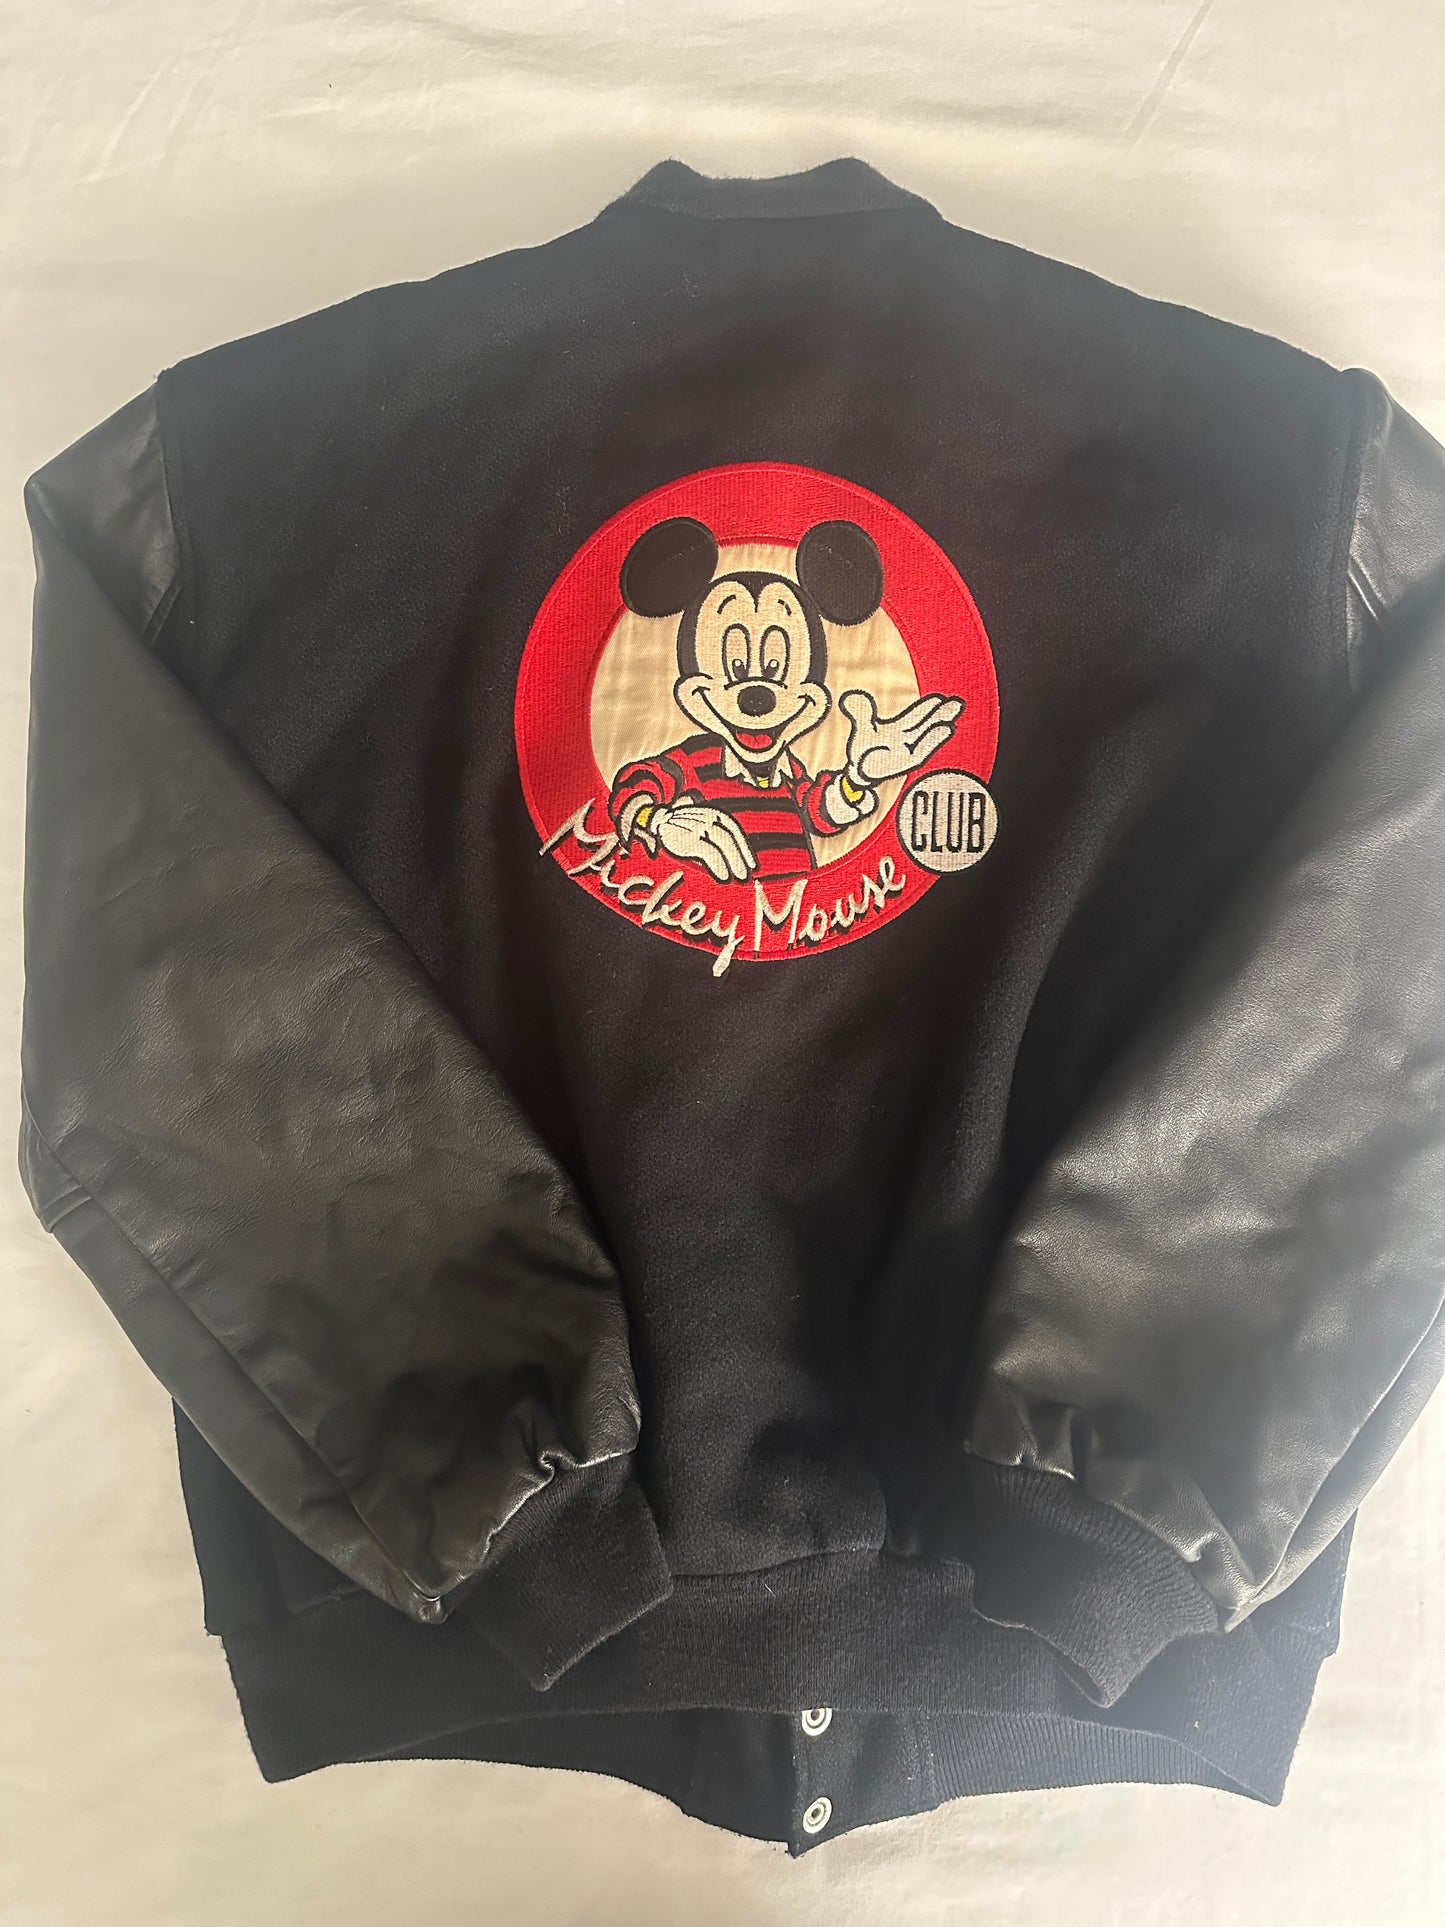 Dale's OFFICIAL Mouse Club Jacket gifted to him by Disney